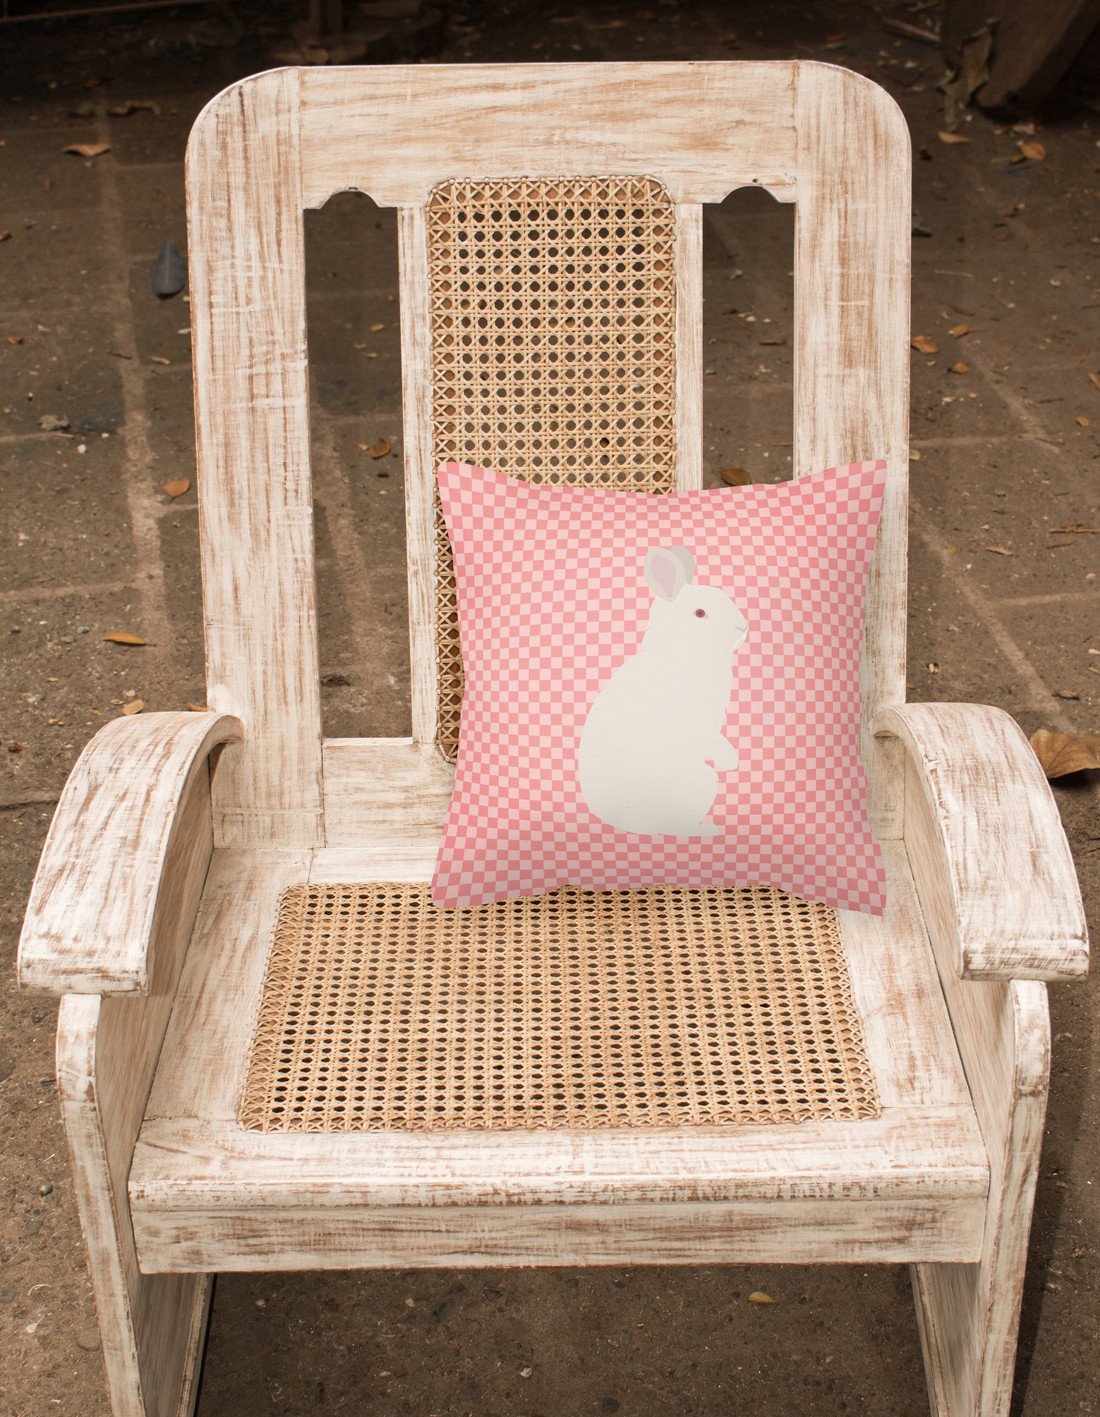 New Zealand White Rabbit Pink Check Fabric Decorative Pillow BB7965PW1818 by Caroline's Treasures